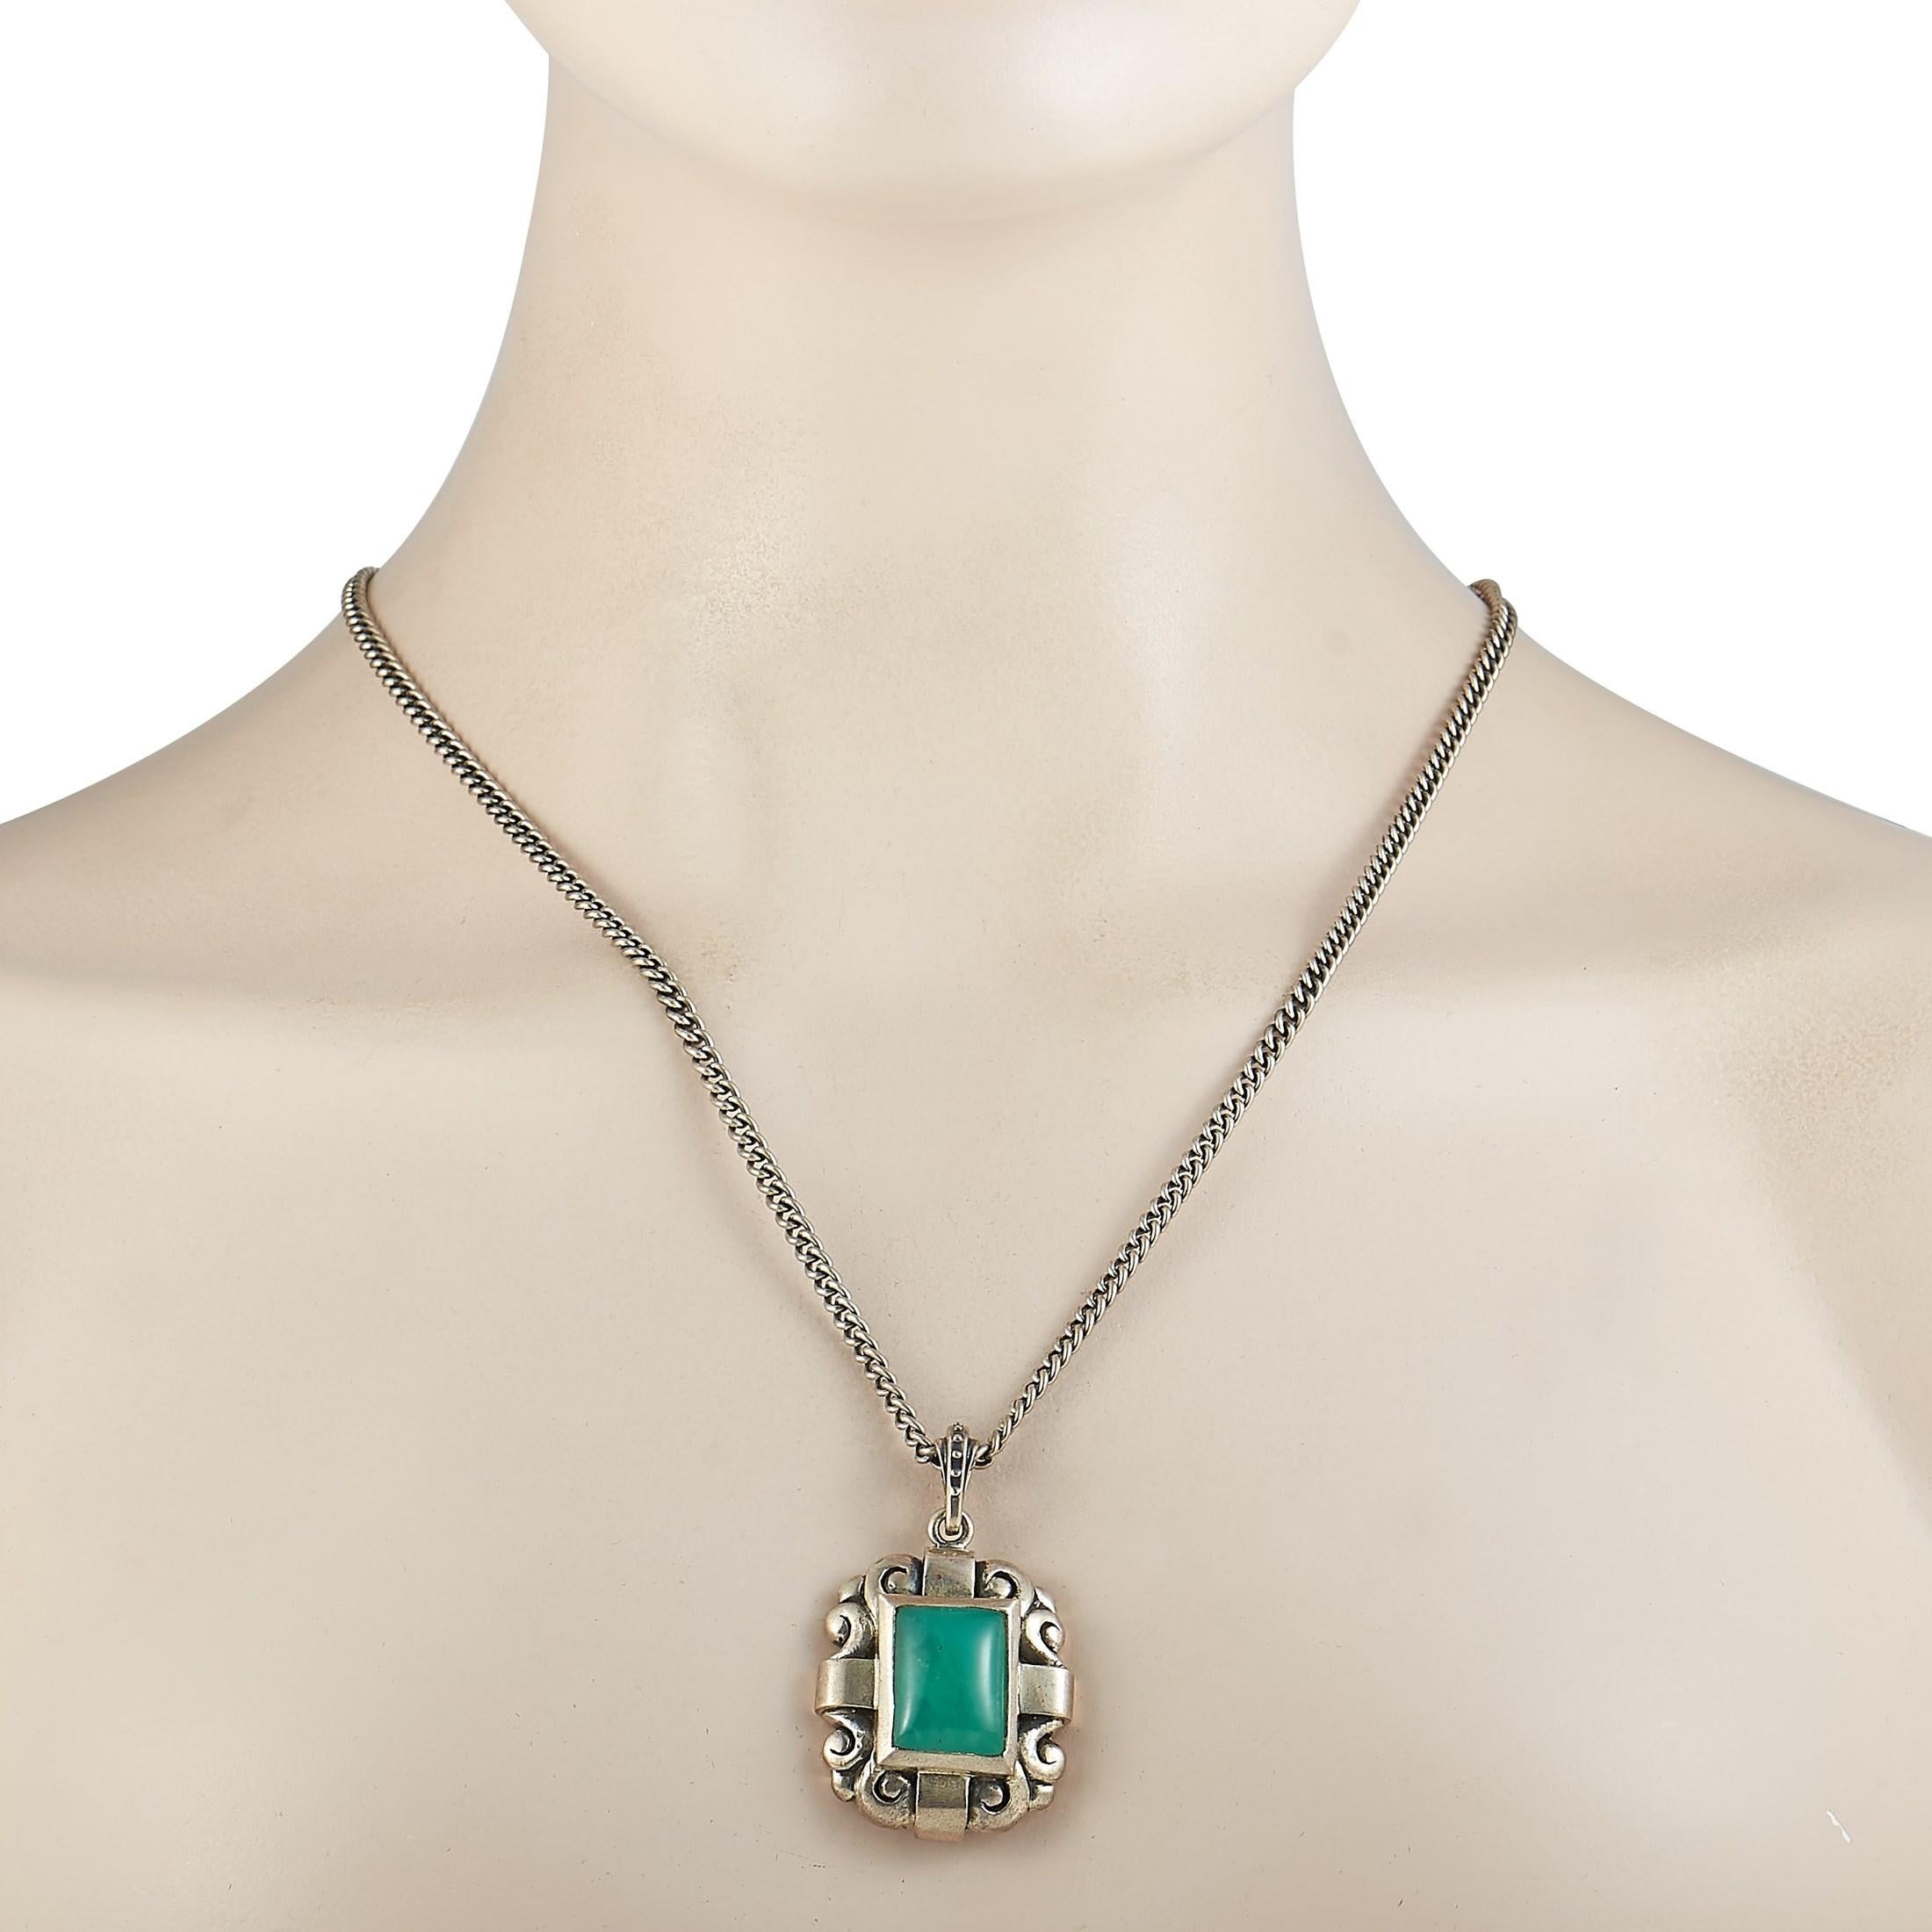 This King Baby necklace is crafted from silver and weighs 54.2 grams. The necklace is presented with a 22” chain onto which a 2” by 1.25” pendant is attached, set with chrysoprase.

Offered in brand-new condition, this item includes the